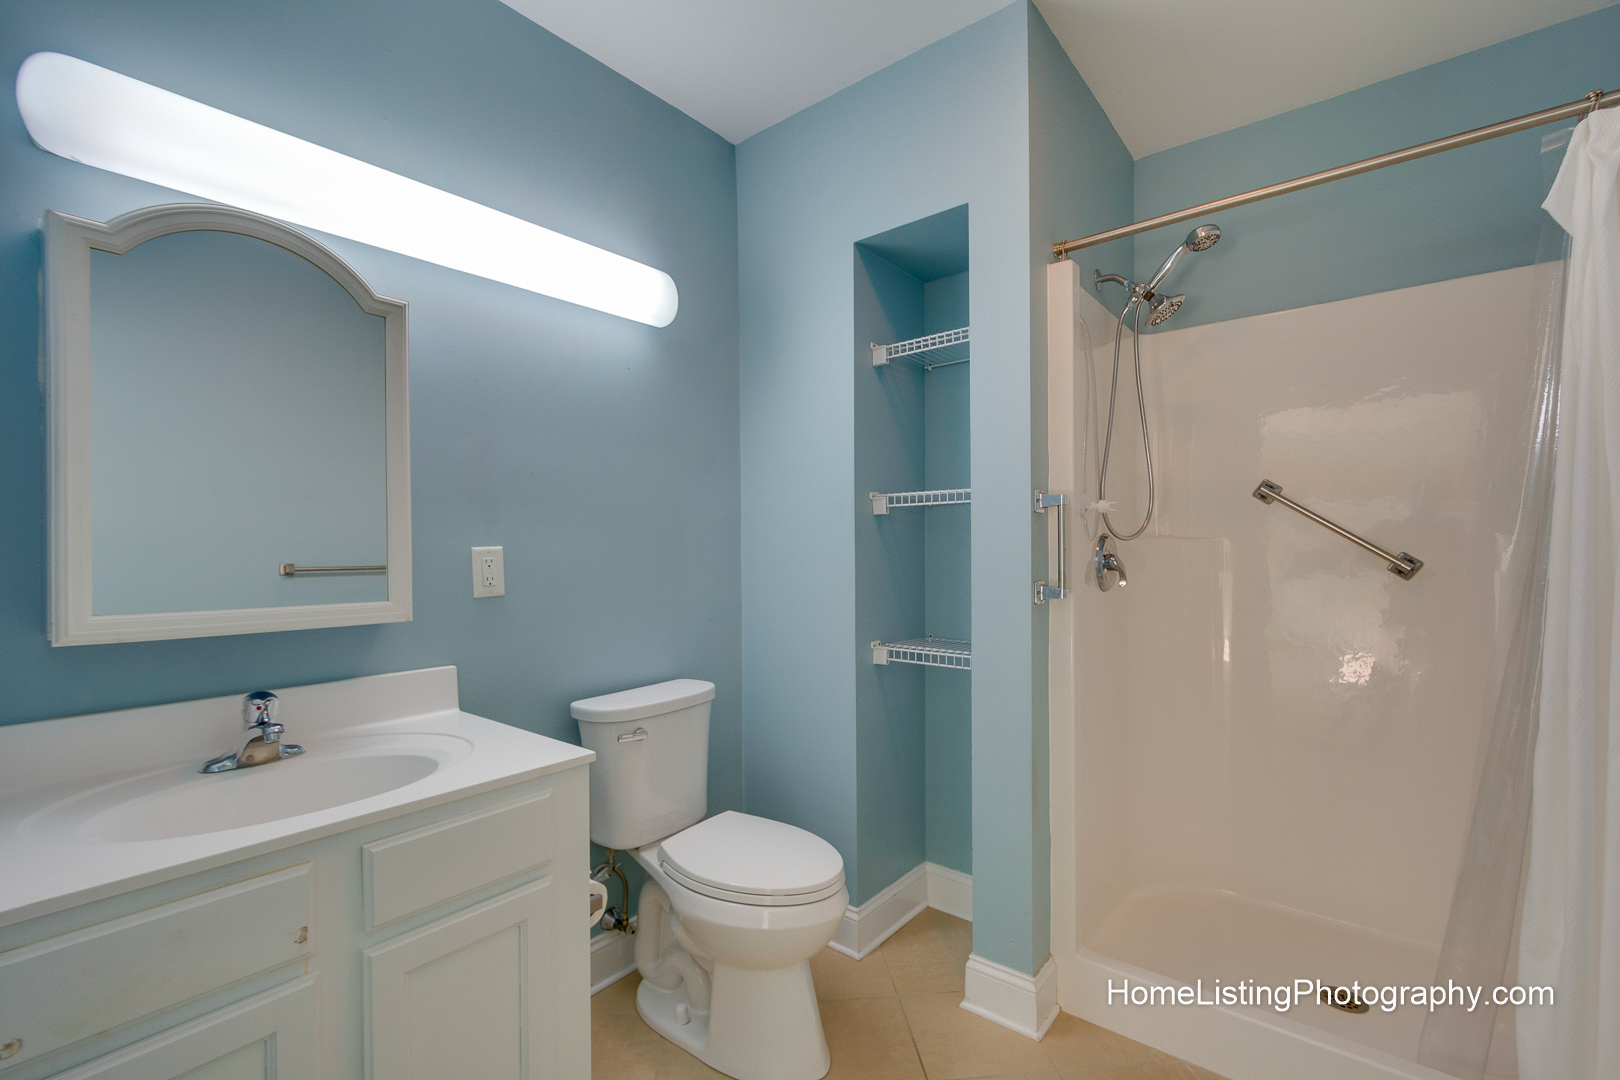 Thomas Adach -Norwood MA professional real estate photographer - 508-655-2225 Home Listing Photography